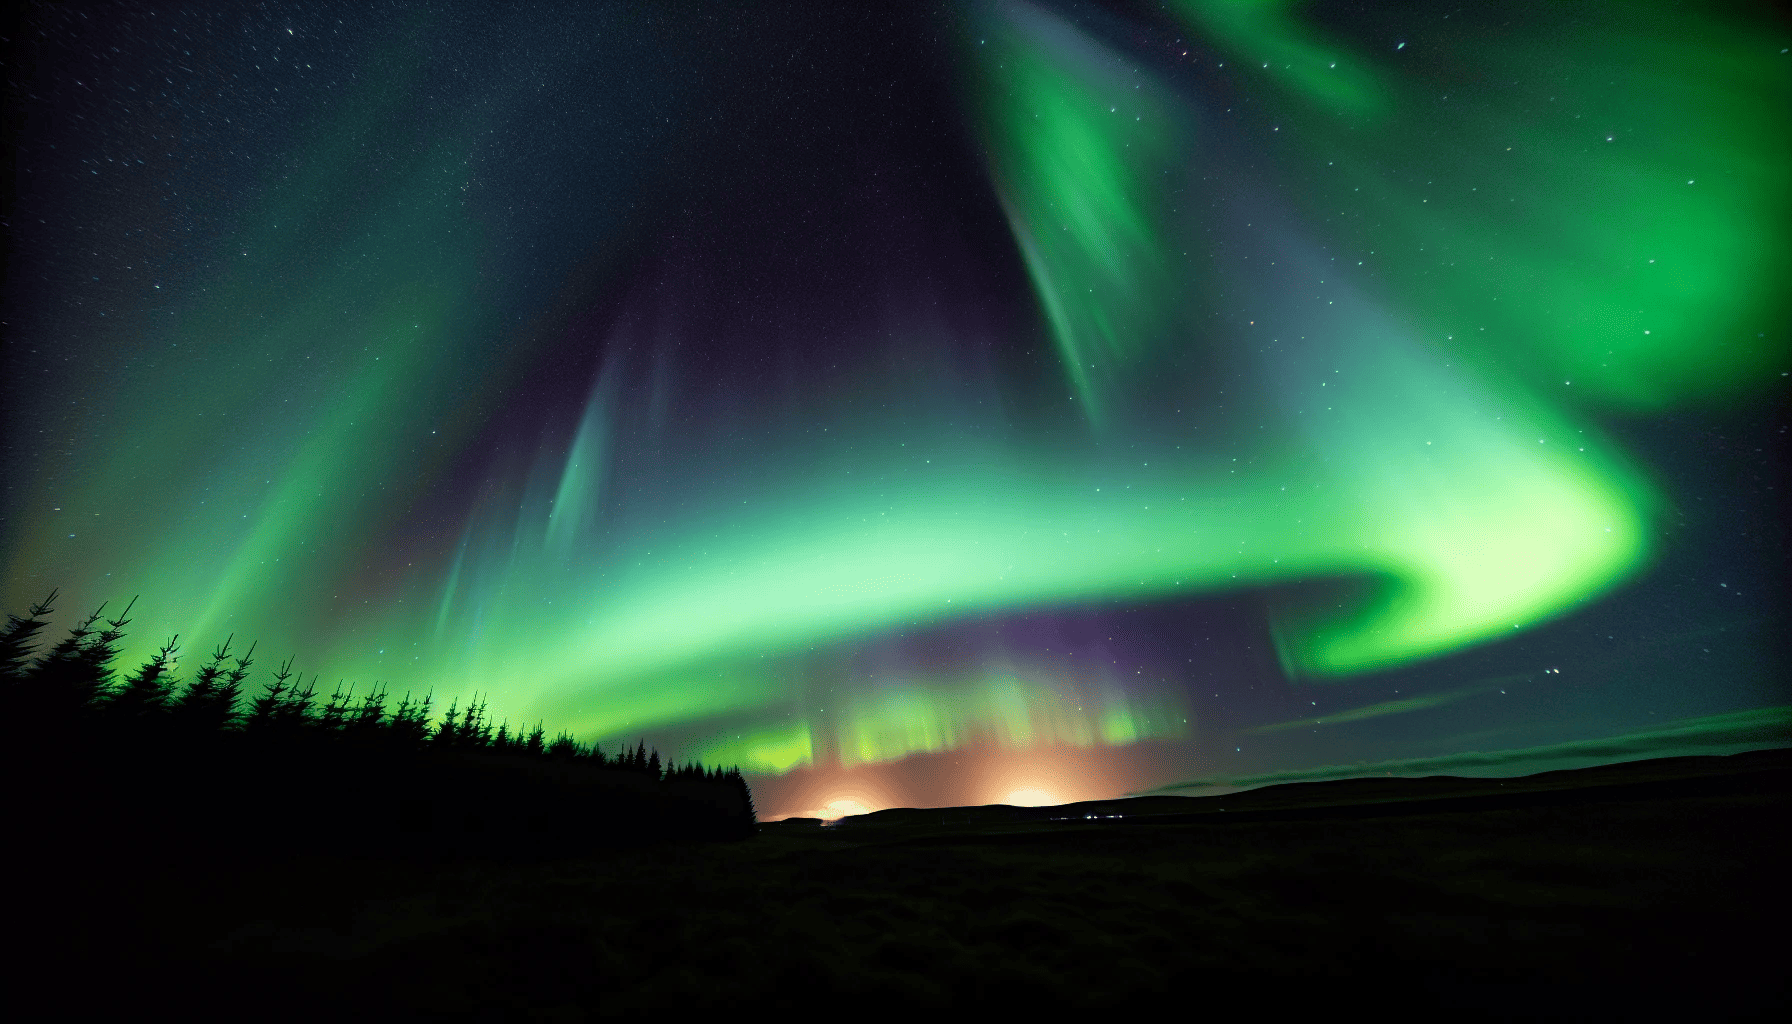 A mesmerizing display of the Northern Lights illuminating the night sky over Northern Ireland